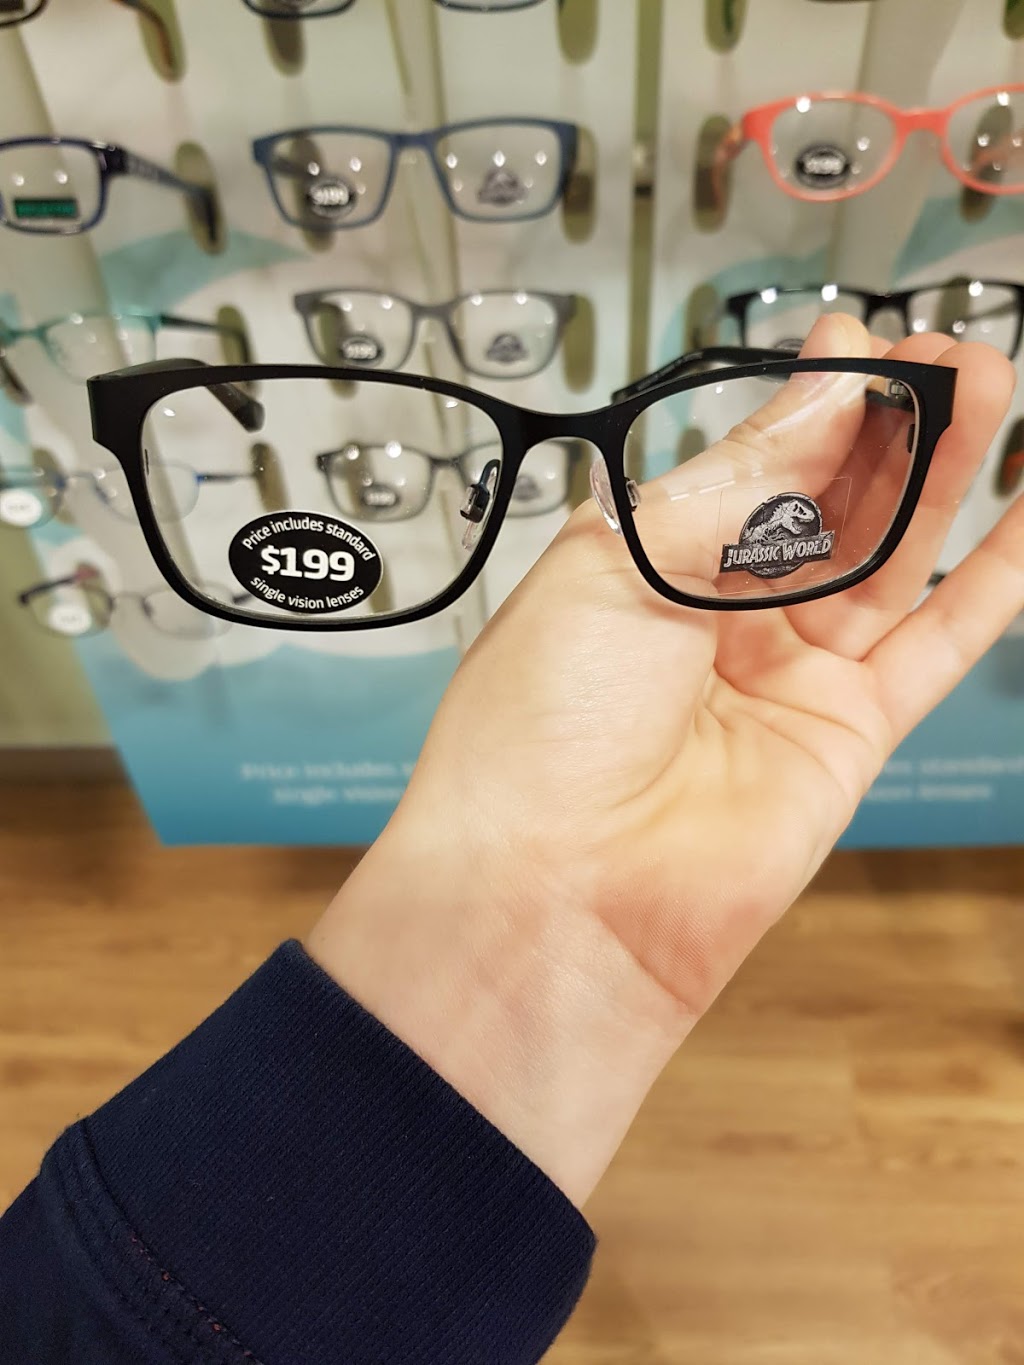 Specsavers Optometrists & Audiology - Noarlunga Centre | doctor | Beach Road Shop SP1999 Colonnades Shopping Centre, Noarlunga Downs SA 5168, Australia | 0881861611 OR +61 8 8186 1611